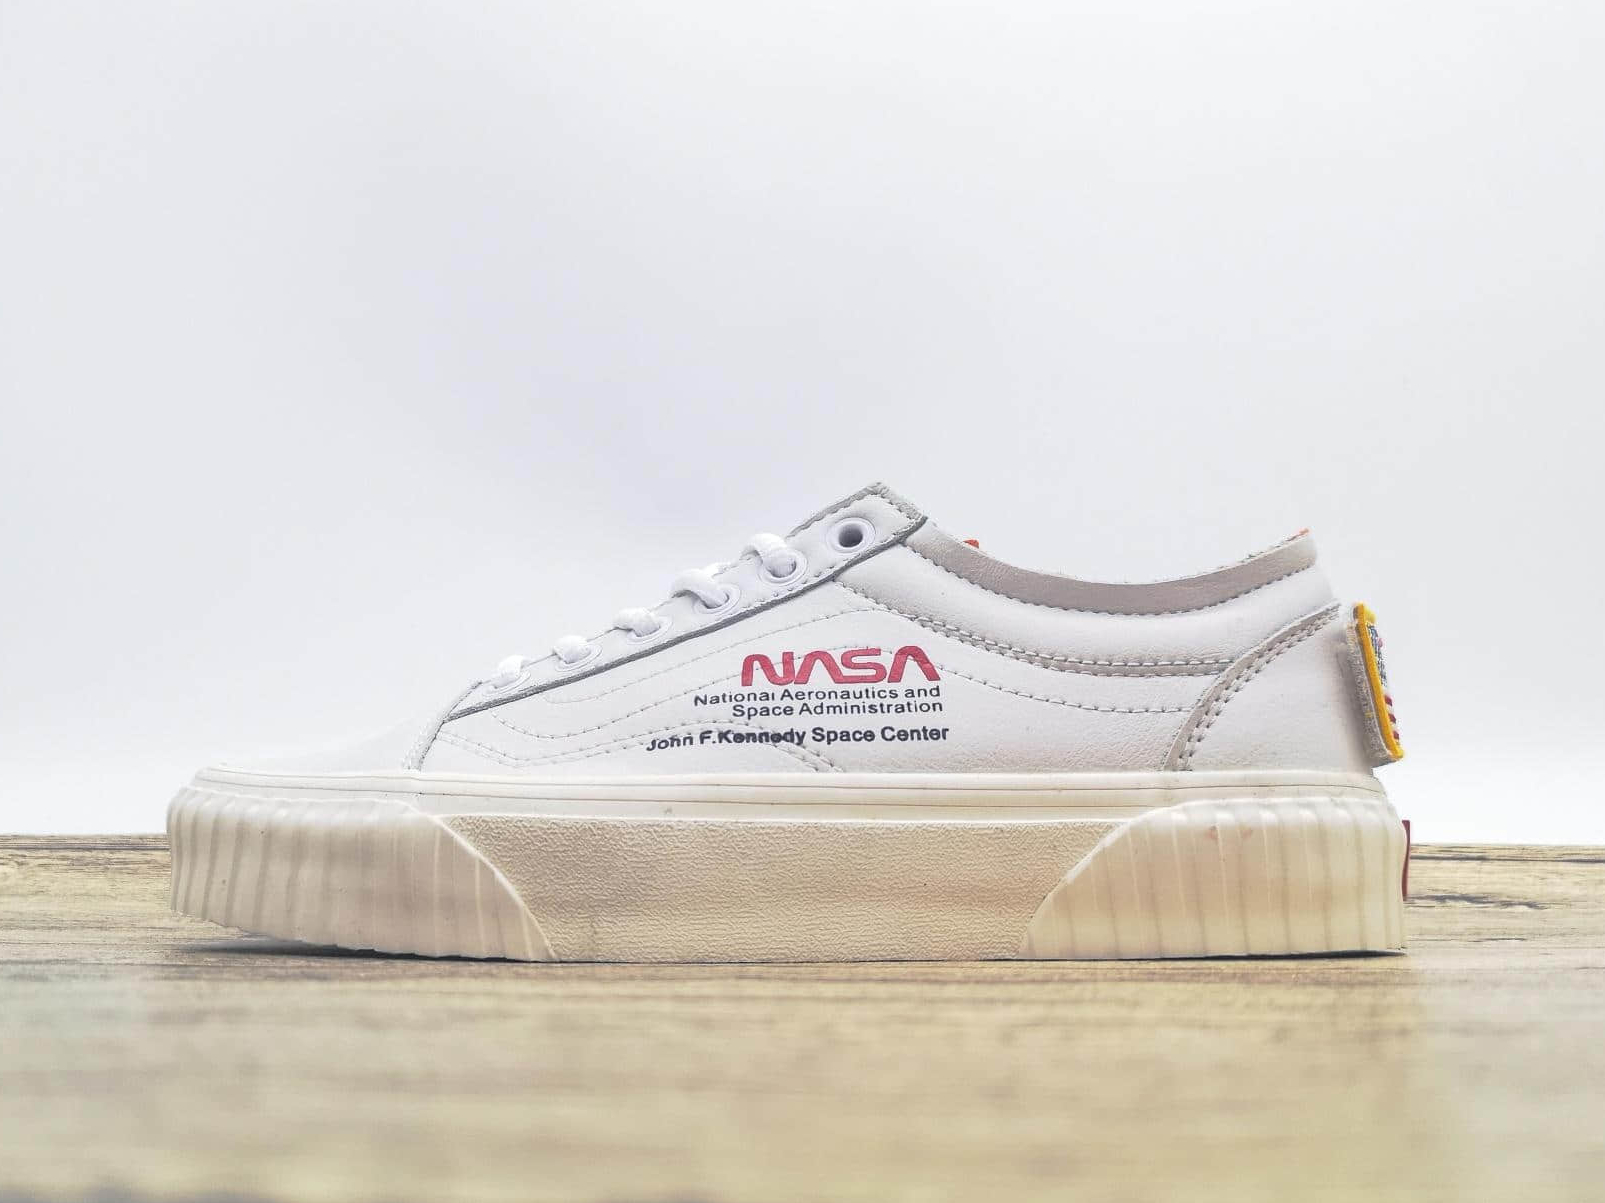 Vans NASA x Old Skool 'Space Voyager' VN0A38G1UP9 - Shop The Limited Edition Collaboration Now!